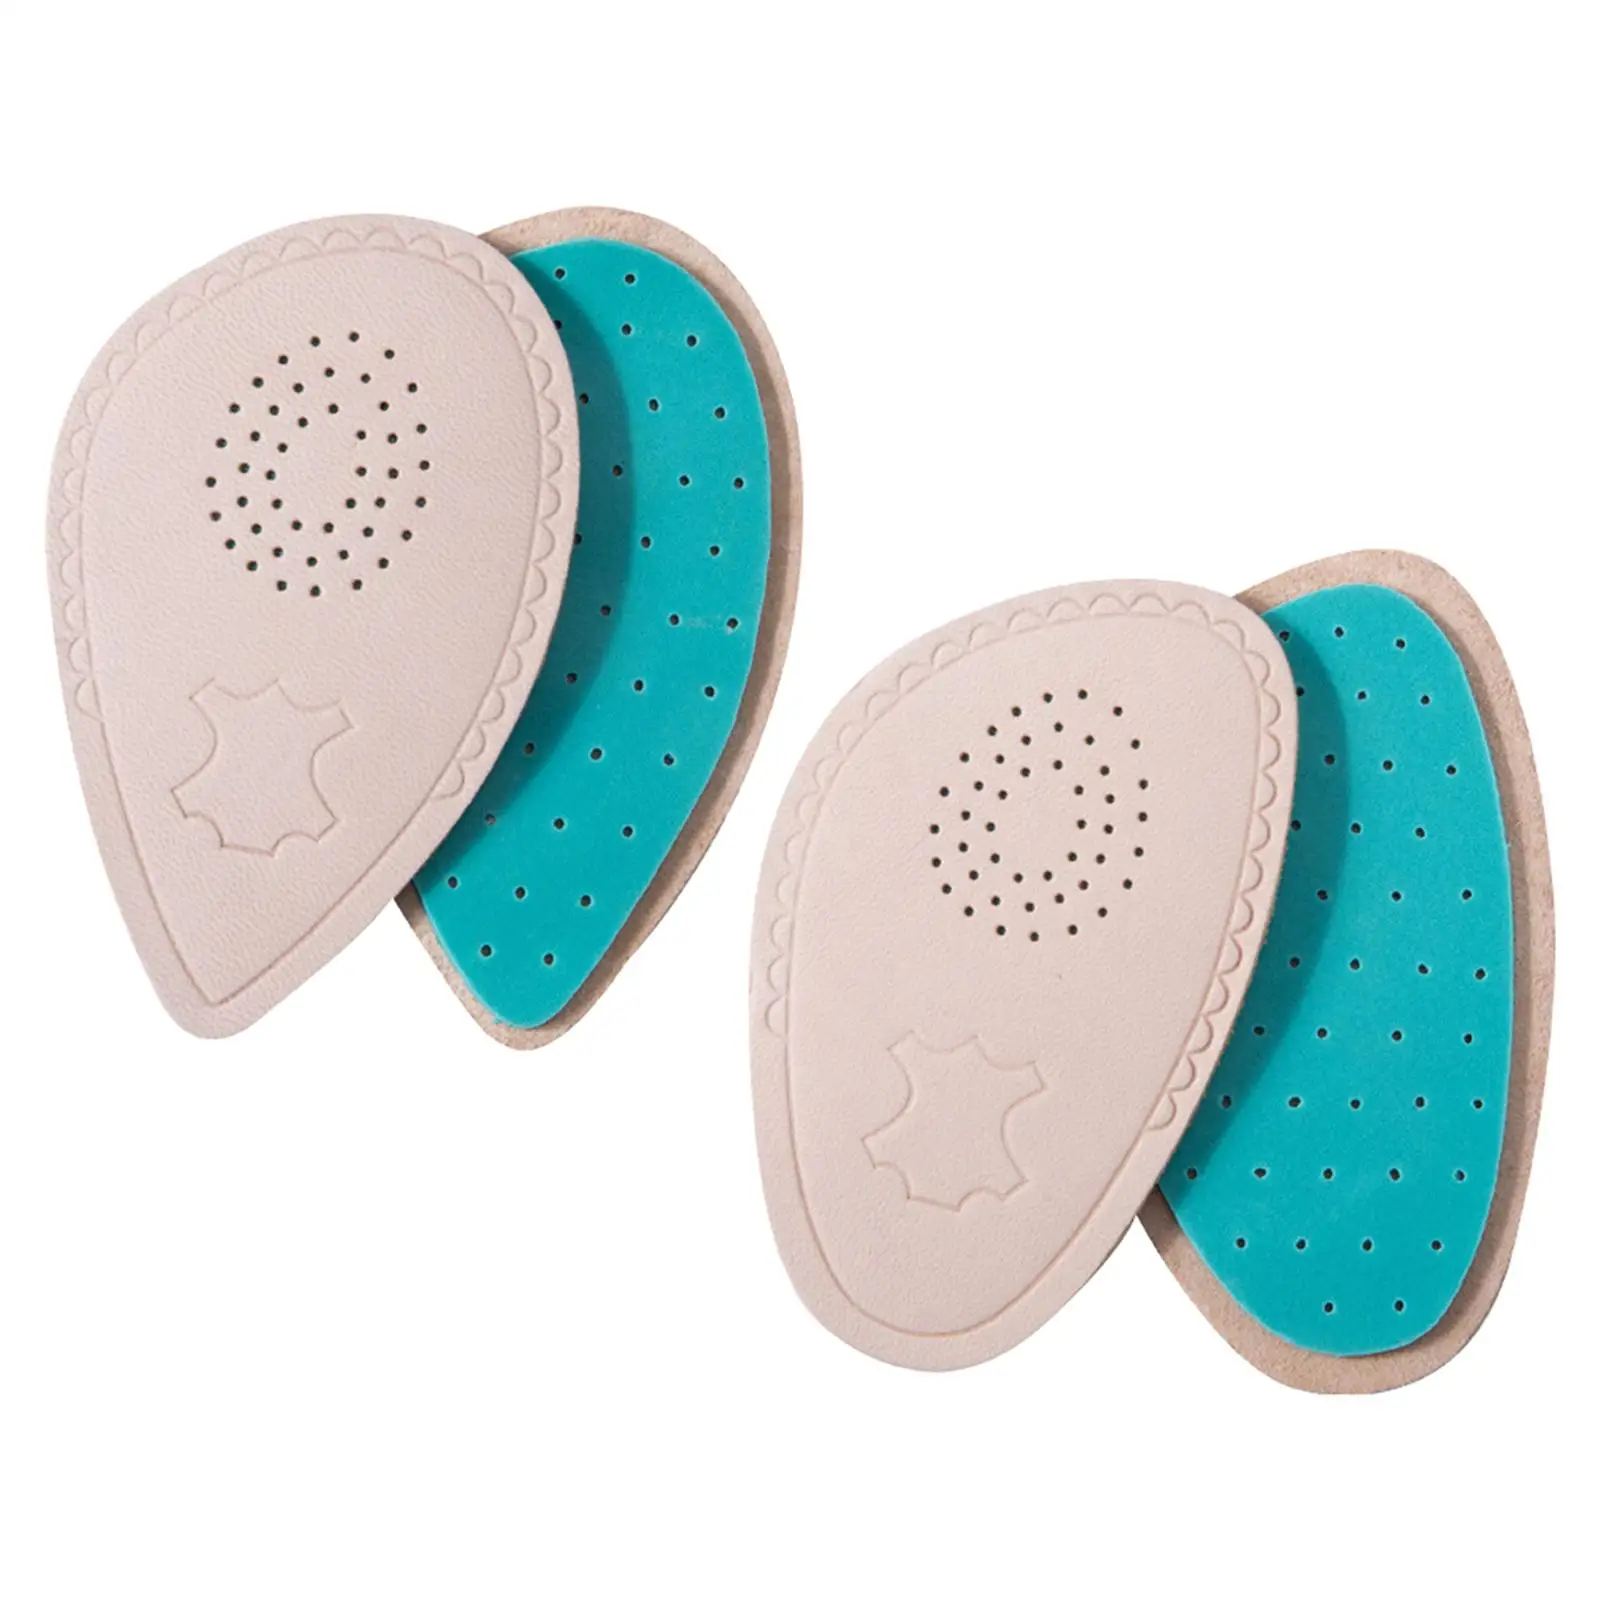 2 Pieces Metatarsal Pads, High  Inserts Comfortable Non , Breathable, Soft Absorb Sweat, Relieve  Forefoot Cushion Unisex